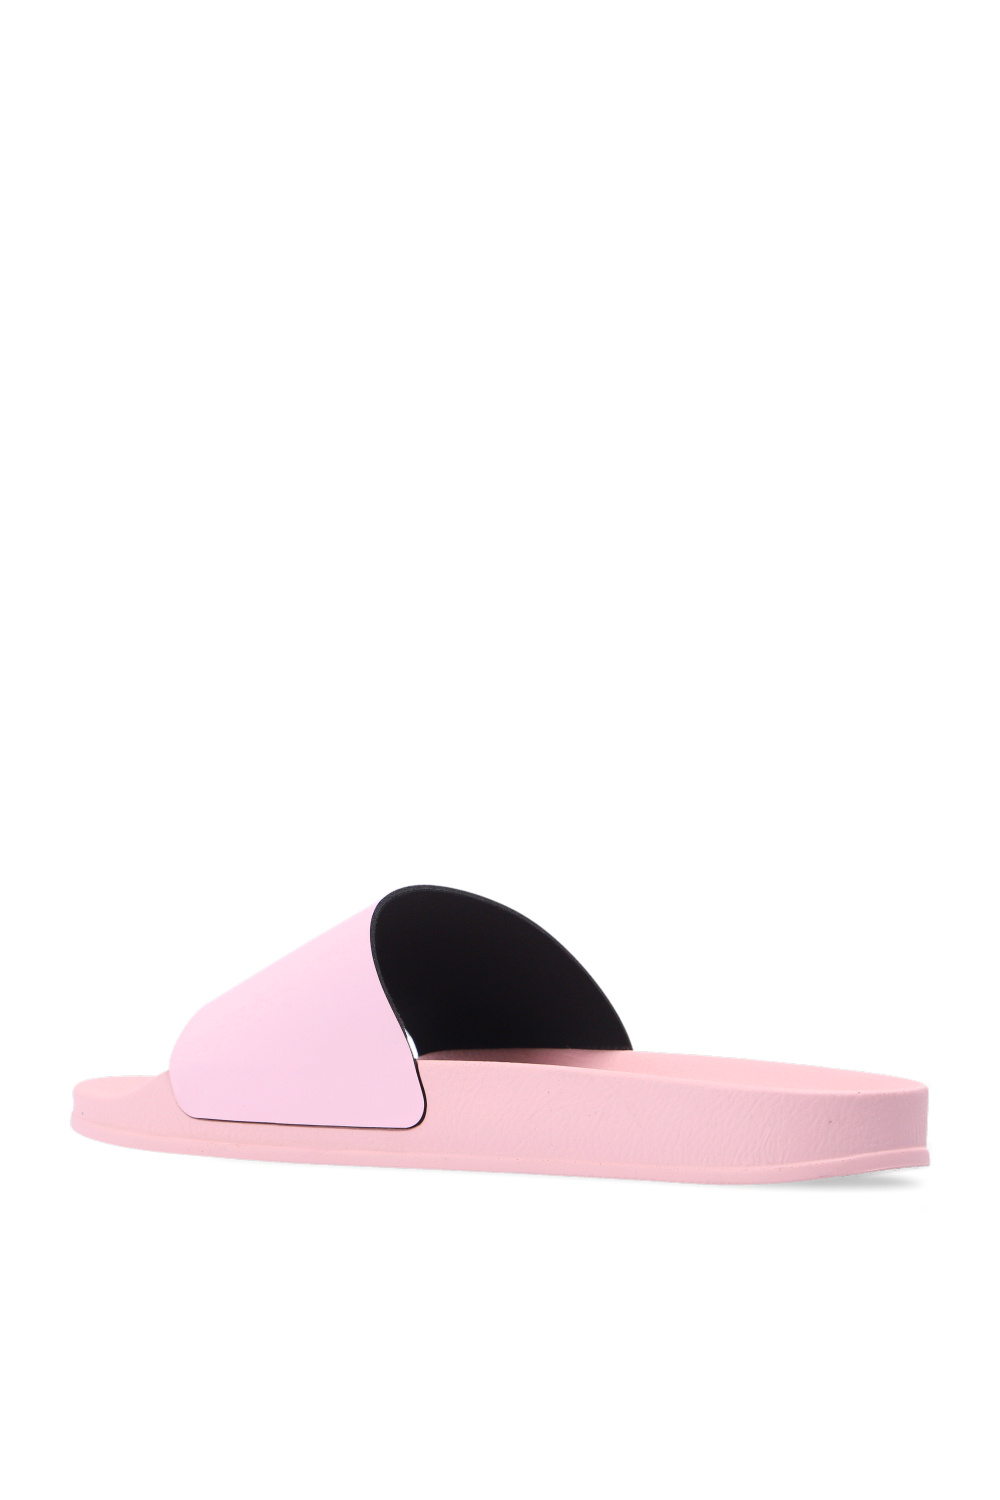 Off-White Rubber slides with logo | Women's Shoes | Vitkac